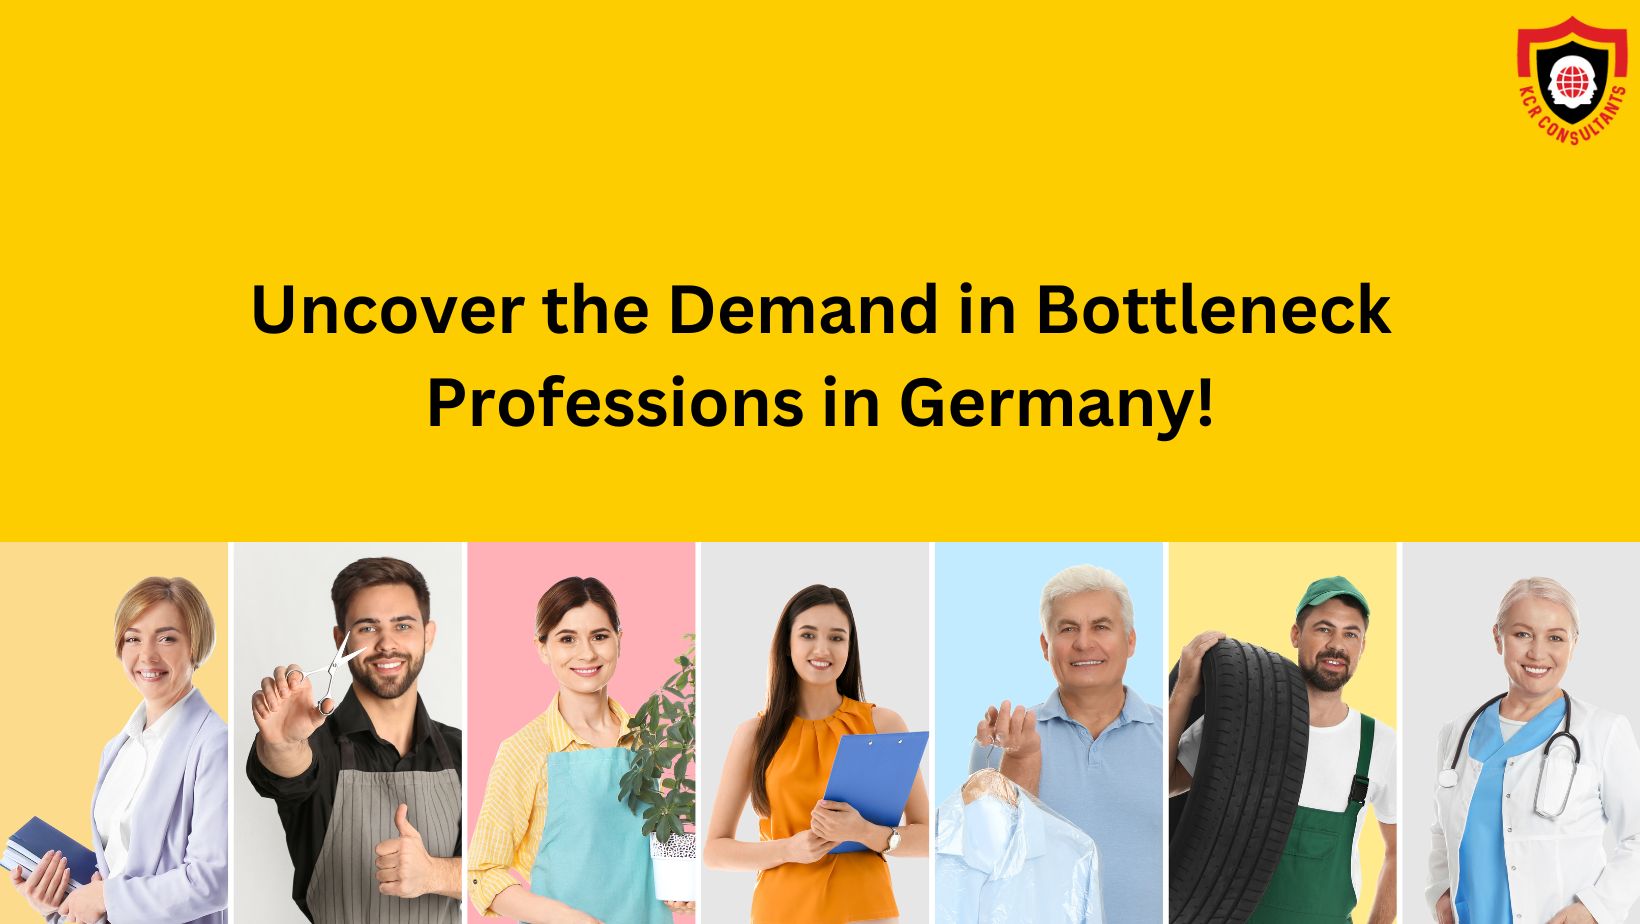 Bottleneck Professions in Germany - KCR CONSULTANTS - Demand for professional in Germany